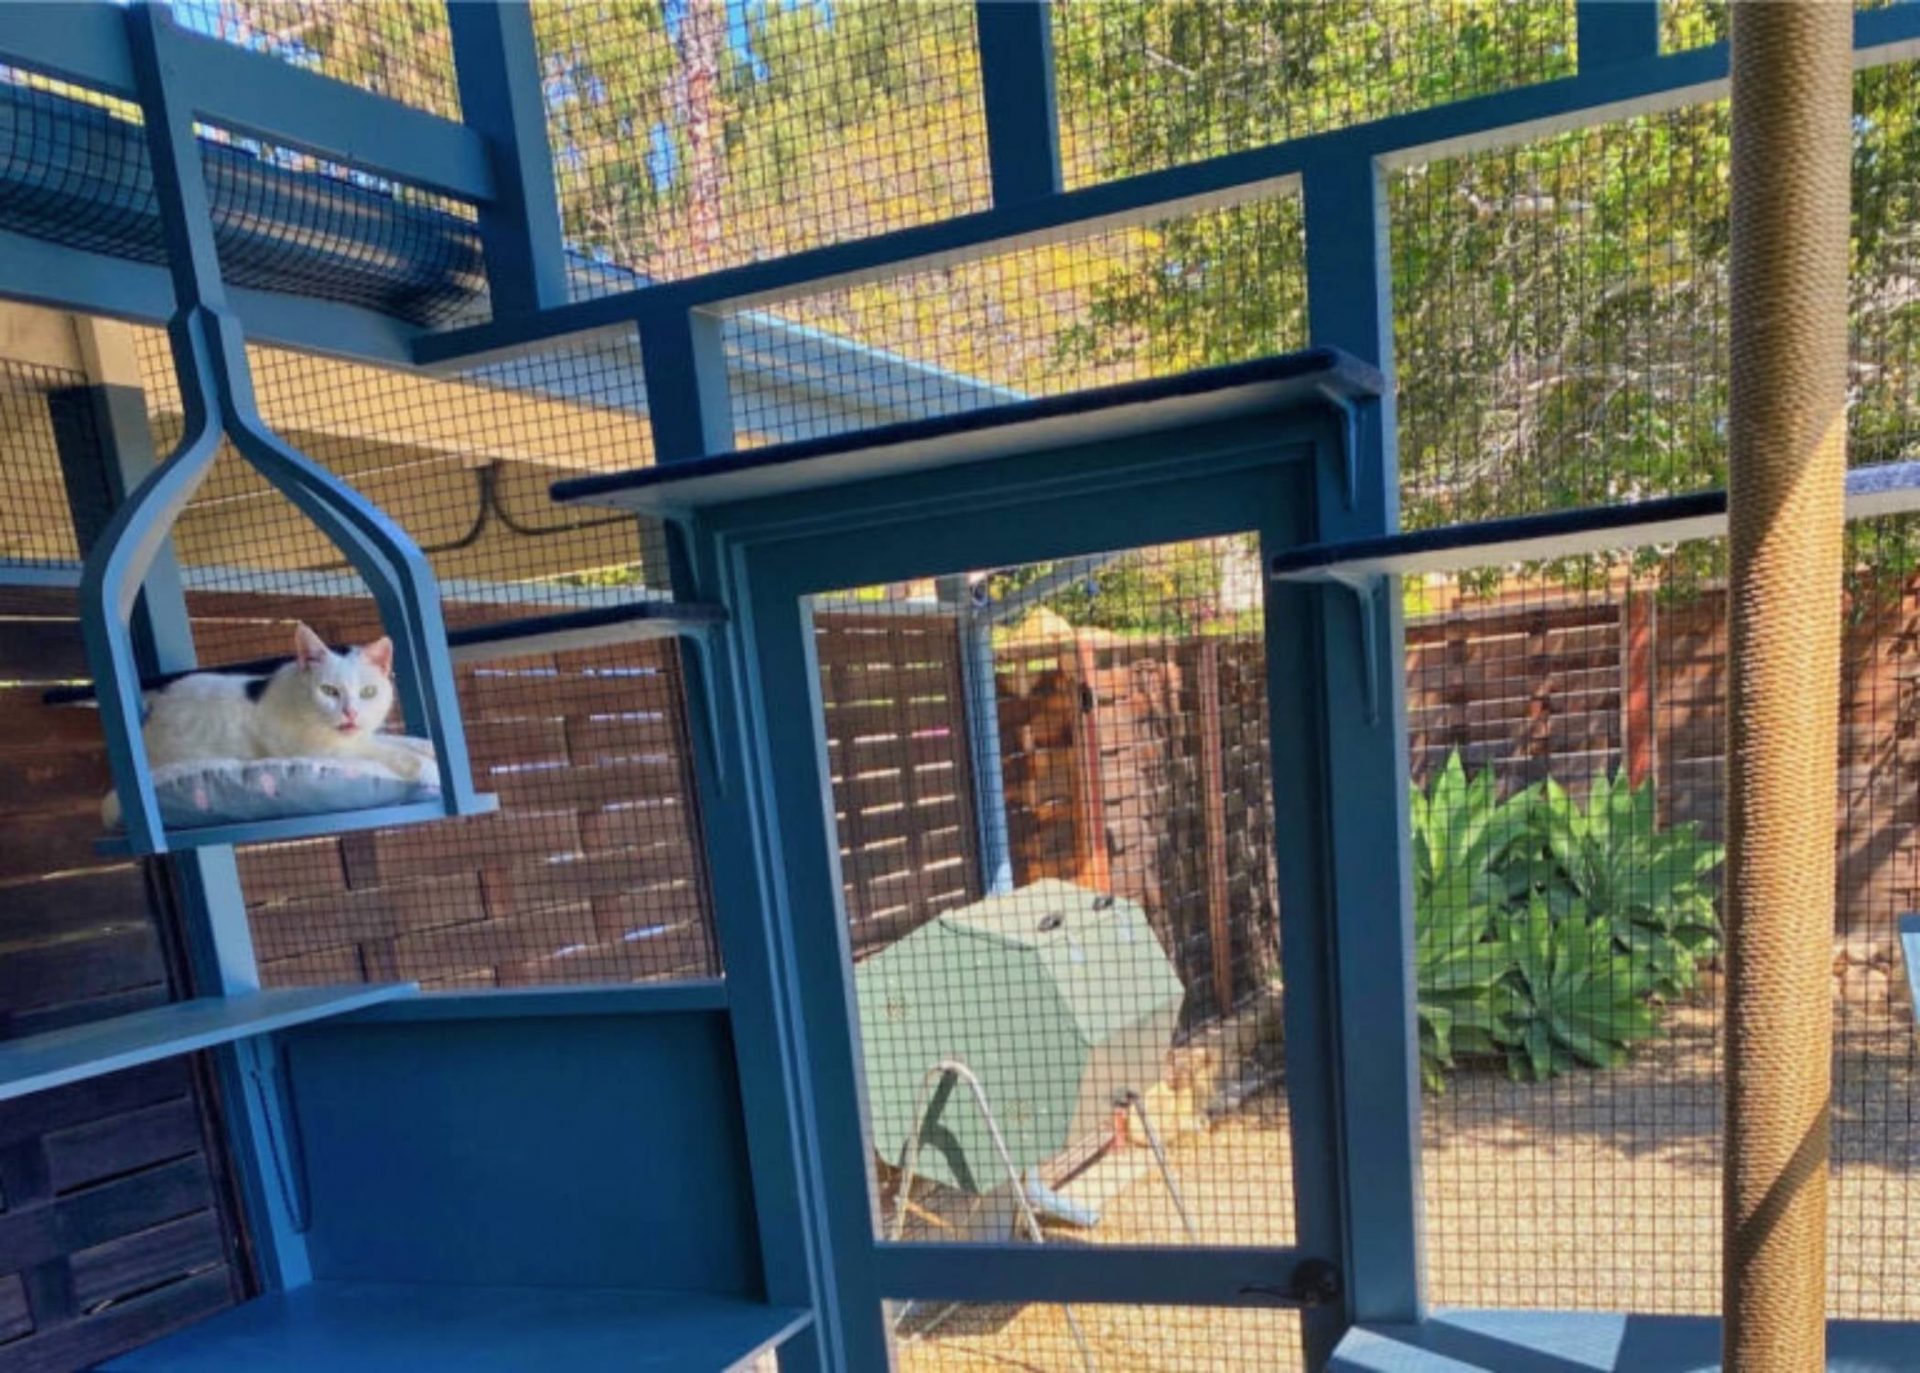 Tricks to make the most acquire, most purr-fect catio in your feline overlord